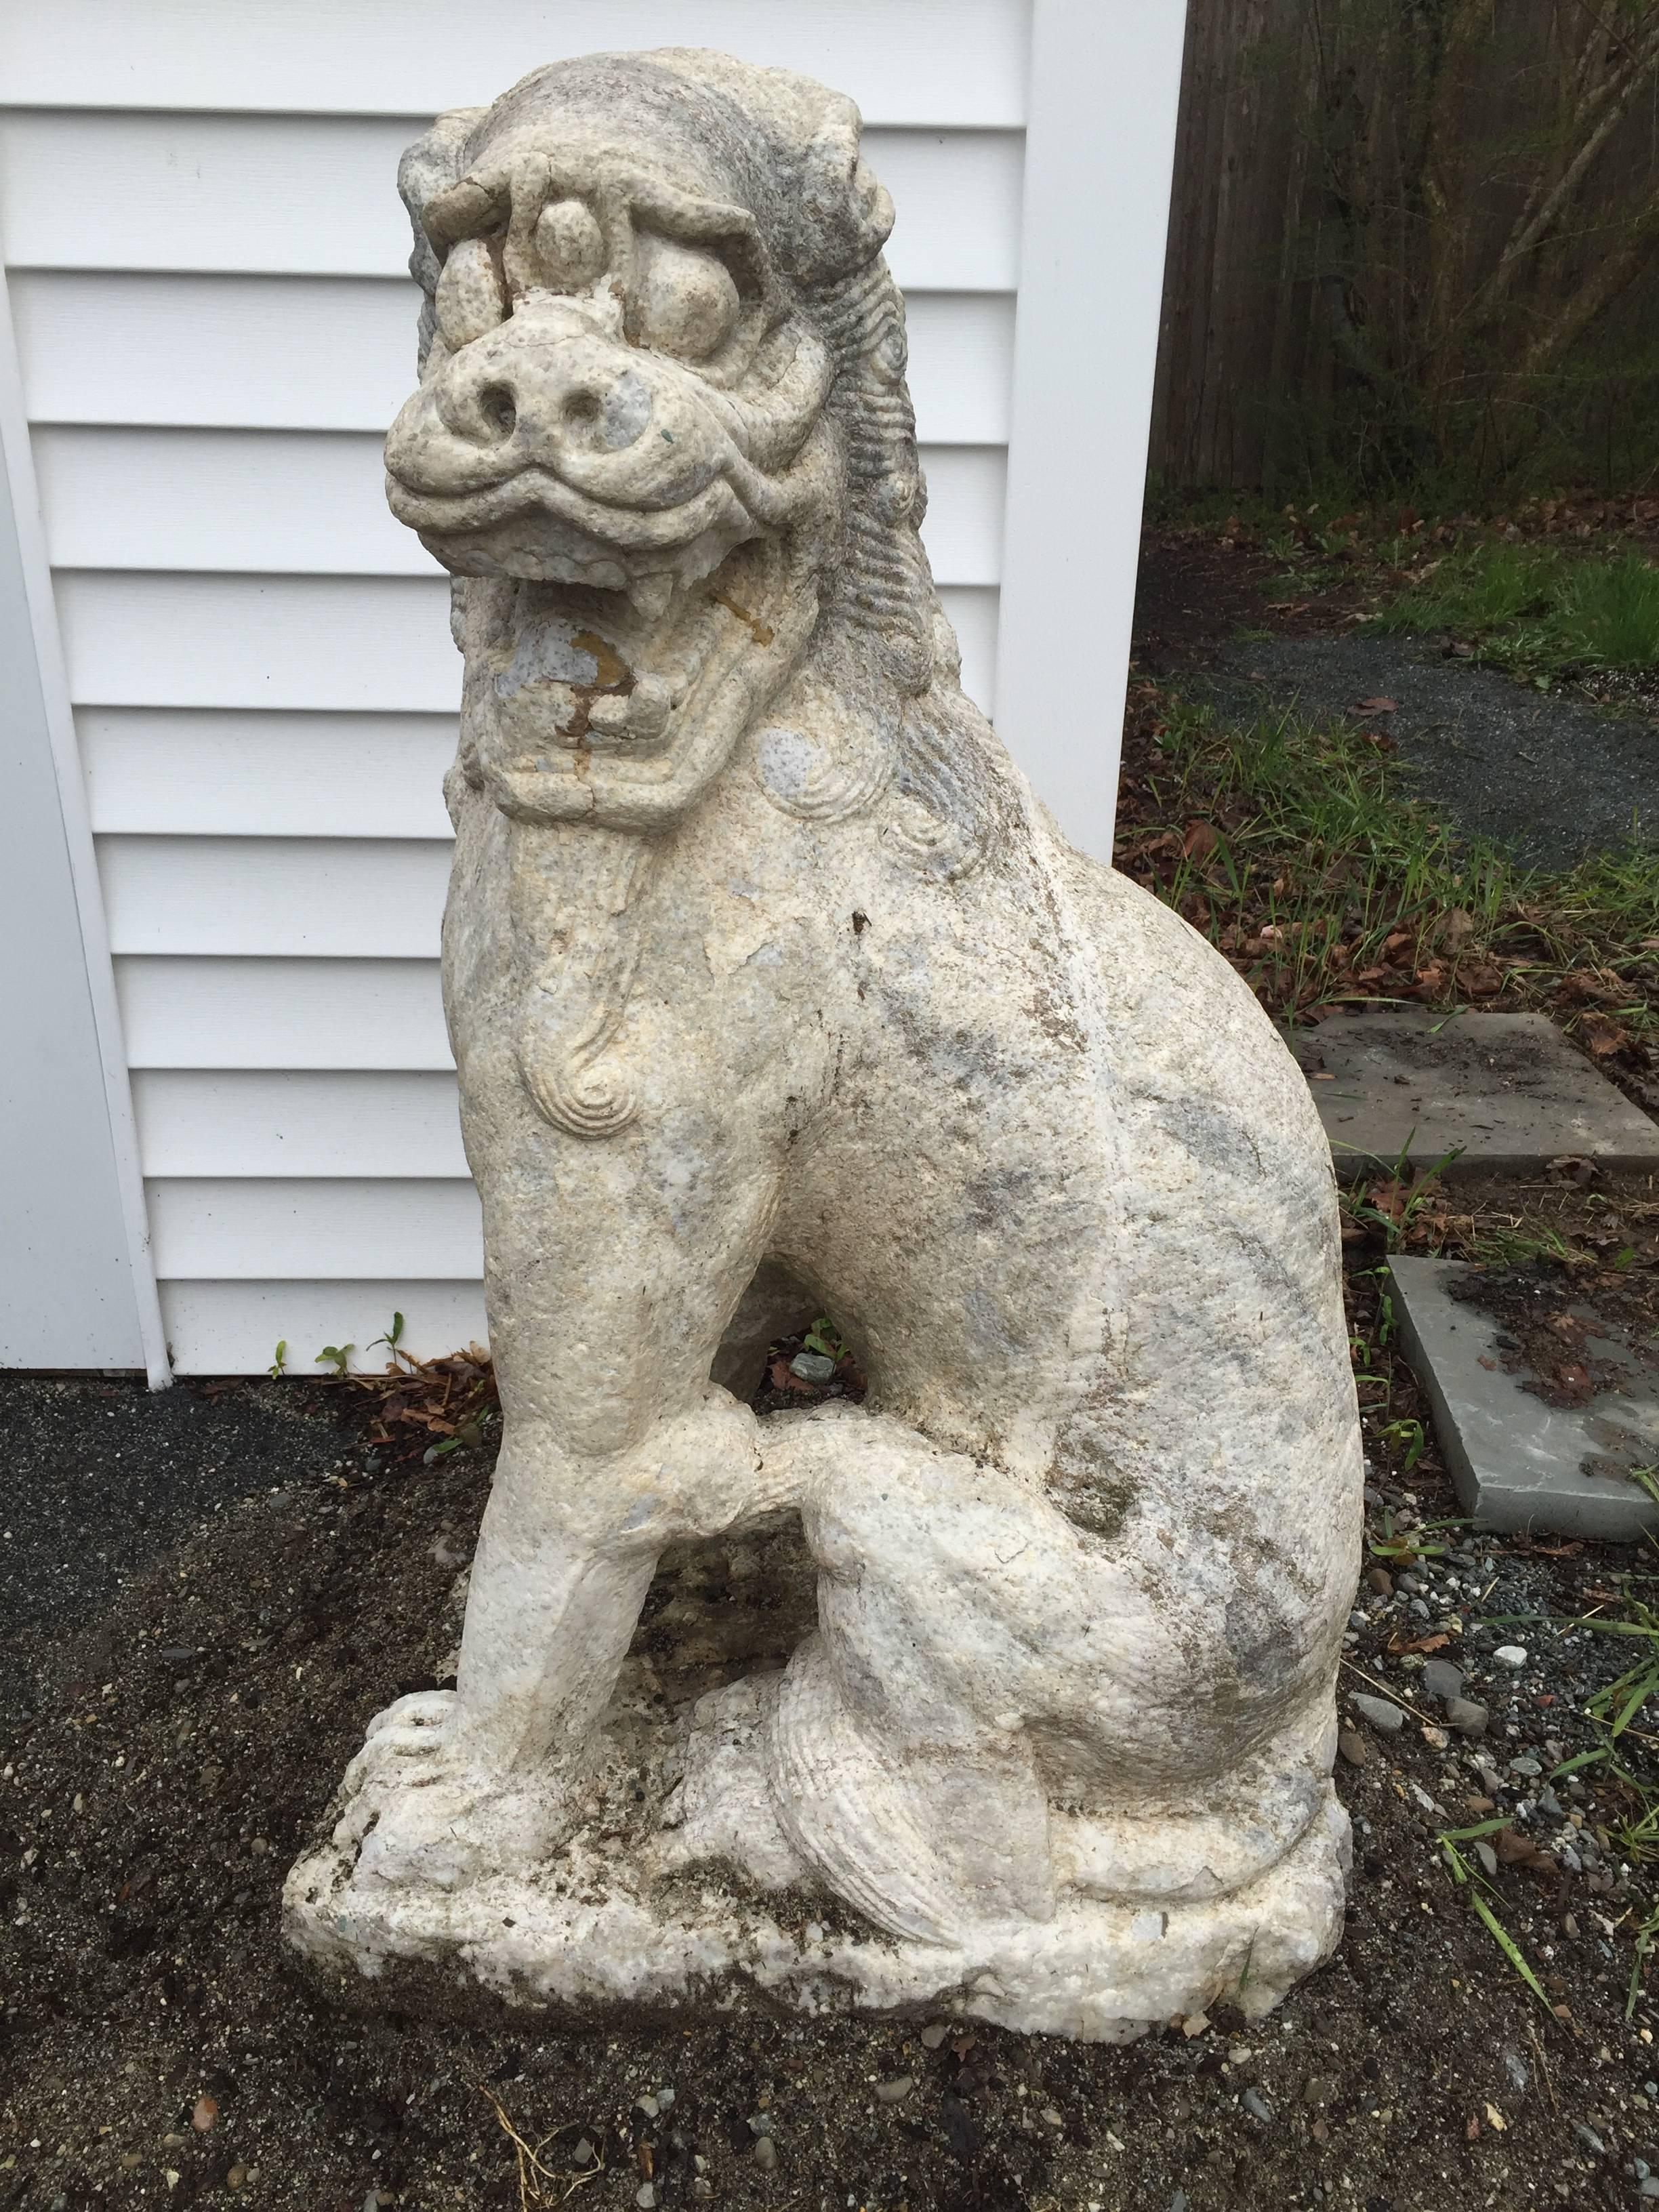 China- a massive pair of large, old hand-carved marble garden stone foo dog guardian lions carved about 50 years ago.

Dimensions:  They measure in at 42 inches high and 19 inches wide and 27 inches deep each. 

Good garden candidates!

Comments: